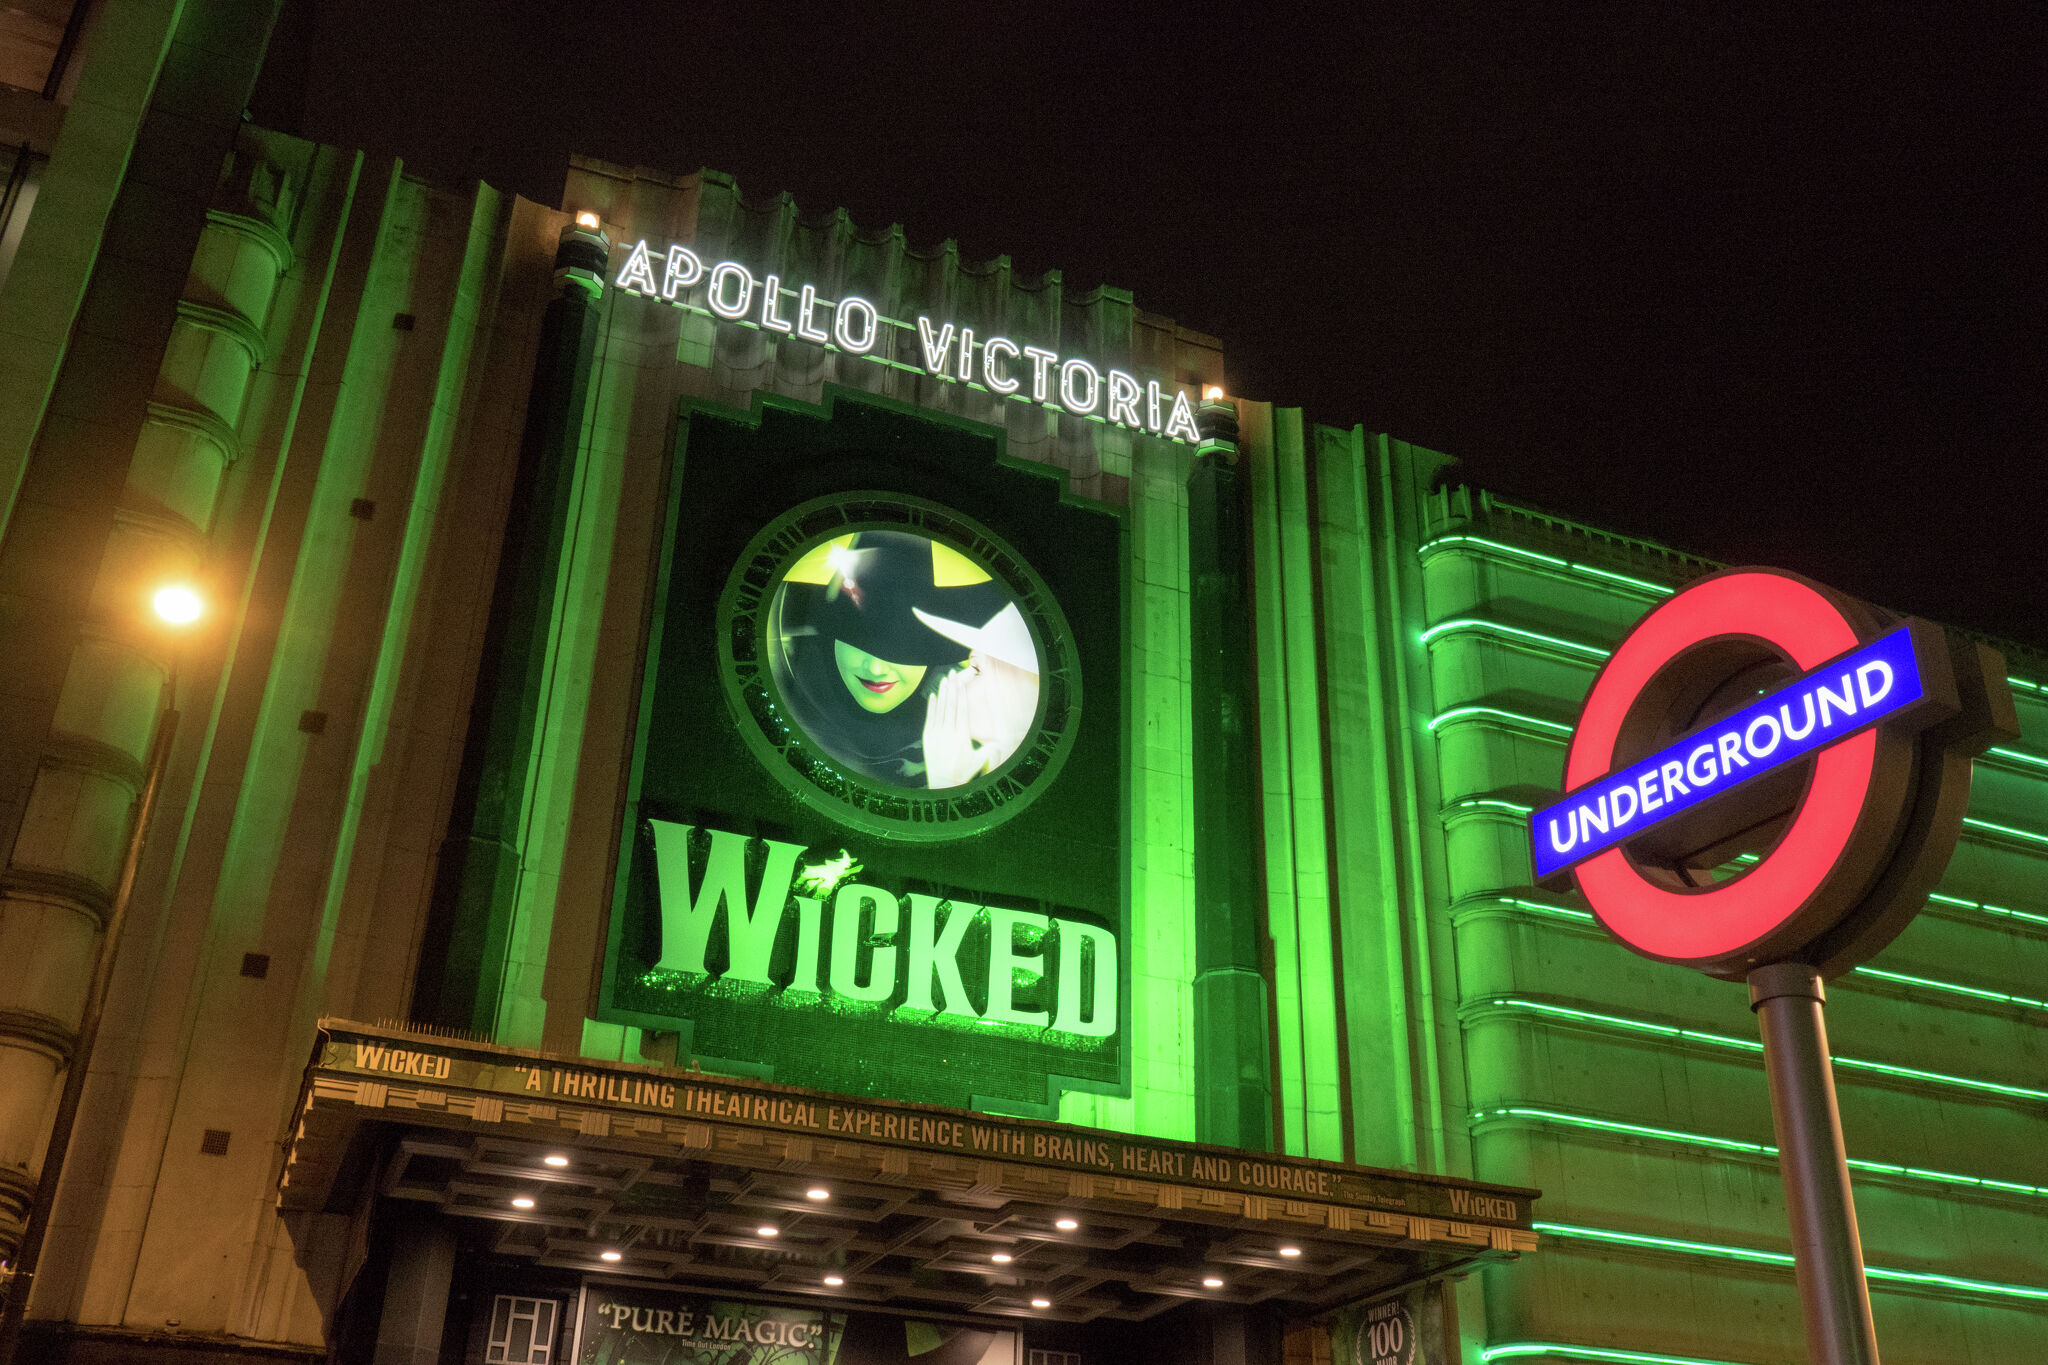 Broadway musical Wicked announces Austin shows and tickets